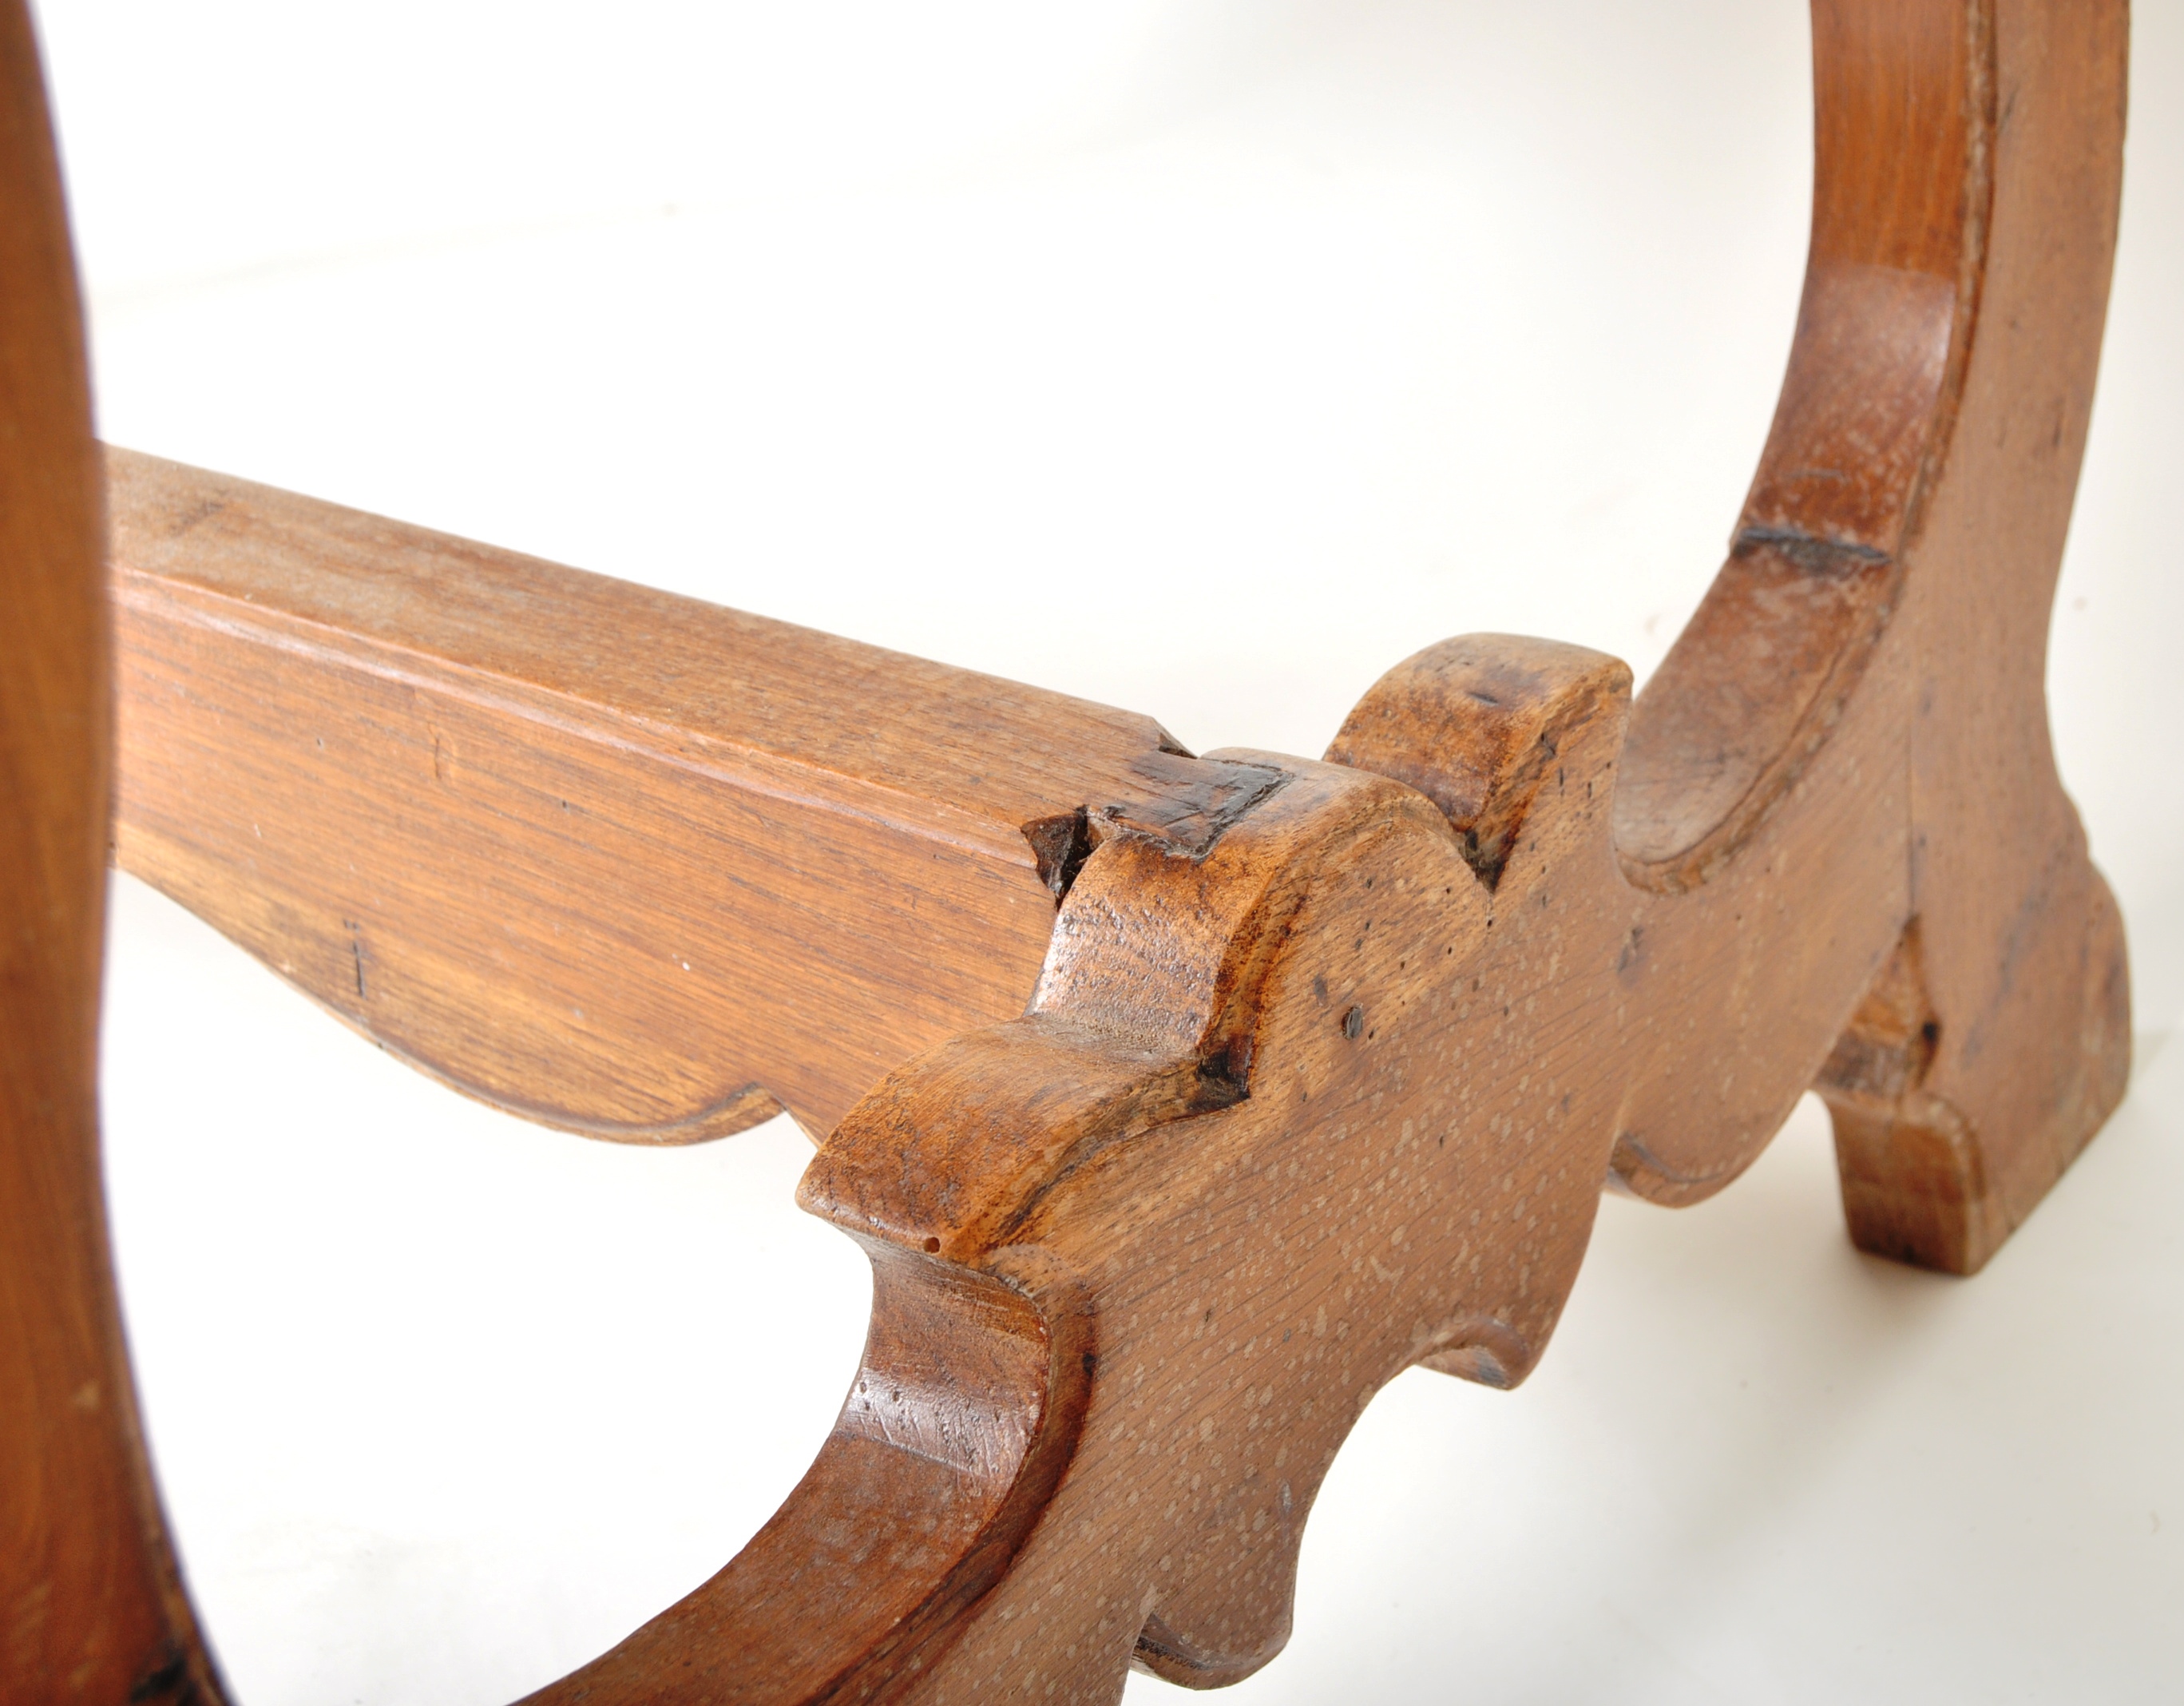 19TH CENTURY CHESTNUT WOOD REFECTORY DINING TABLE - Image 7 of 7